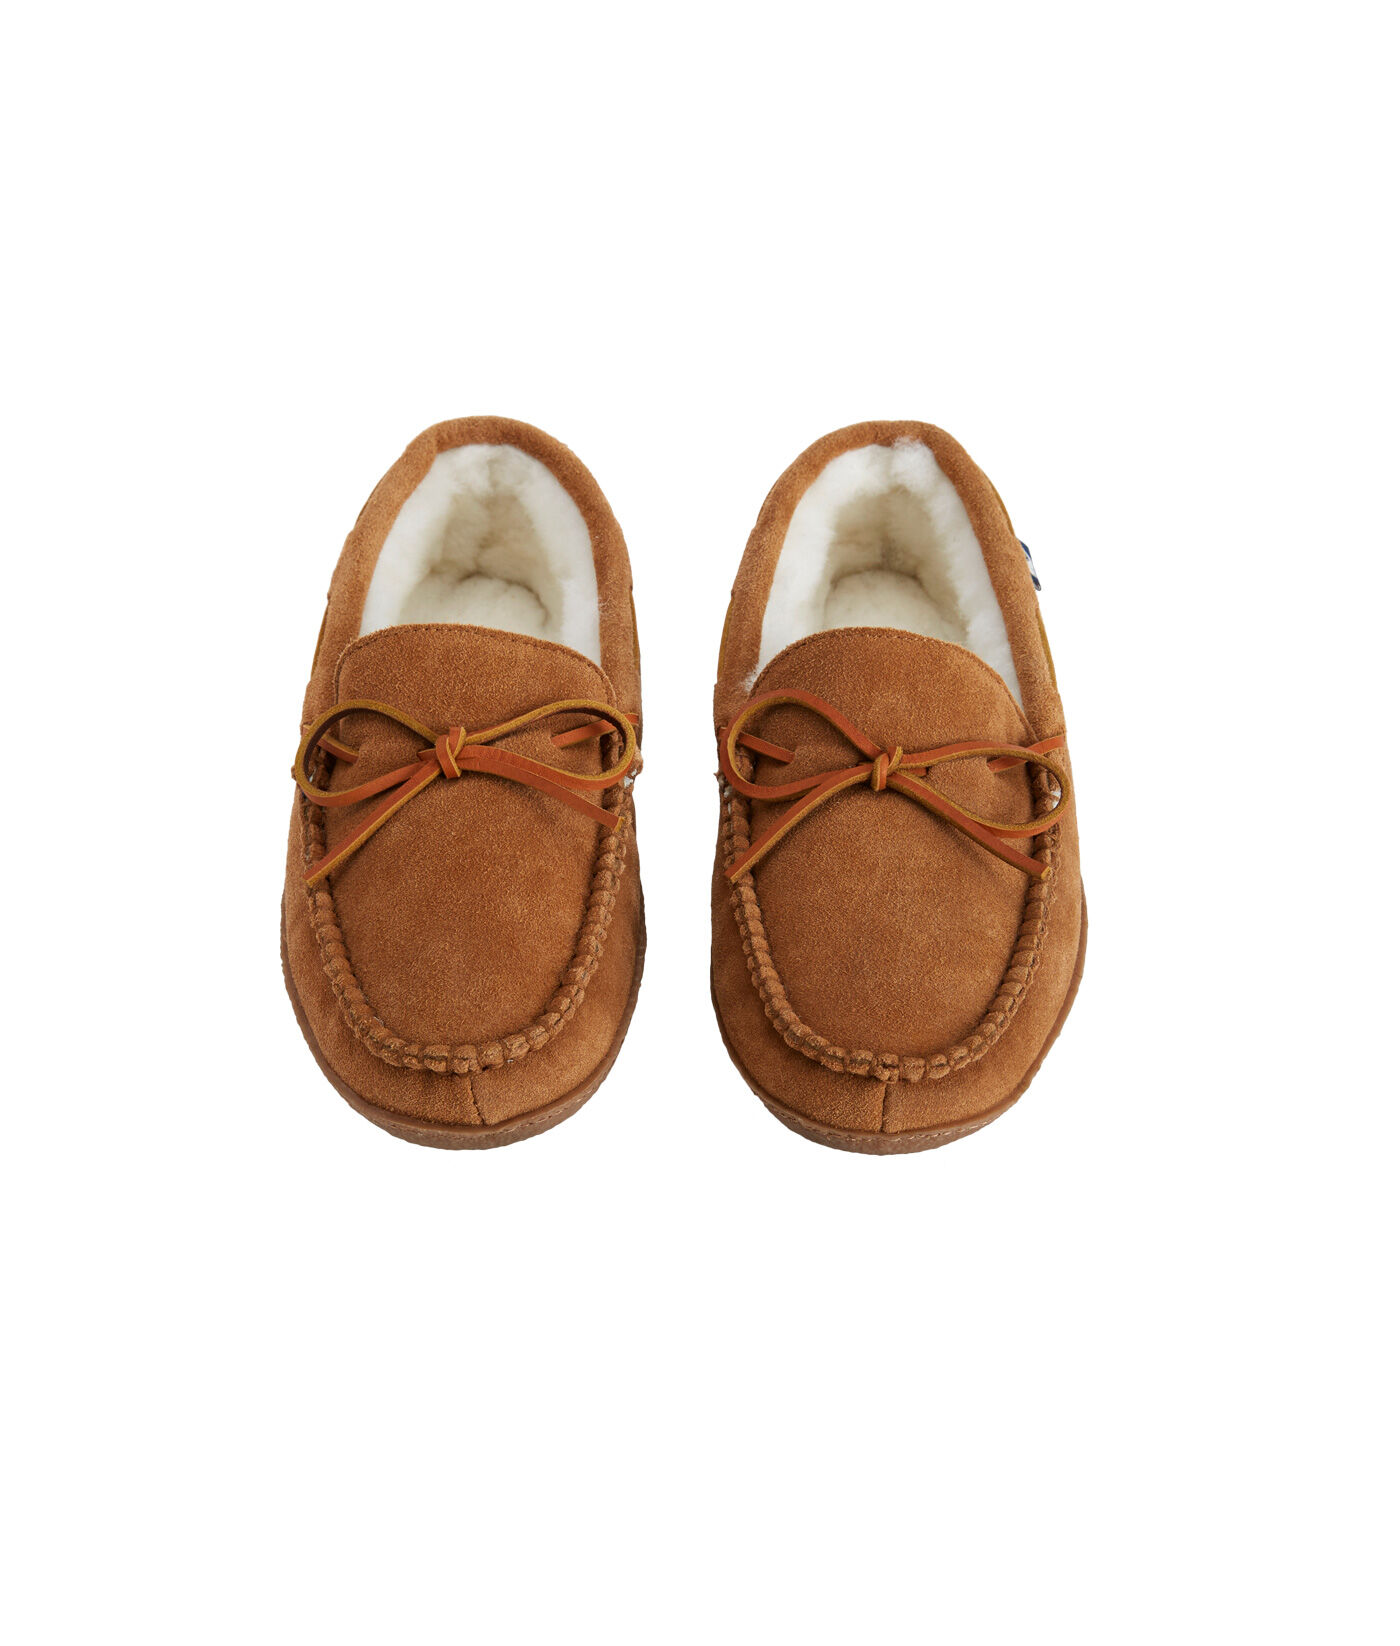 mens holiday slippers